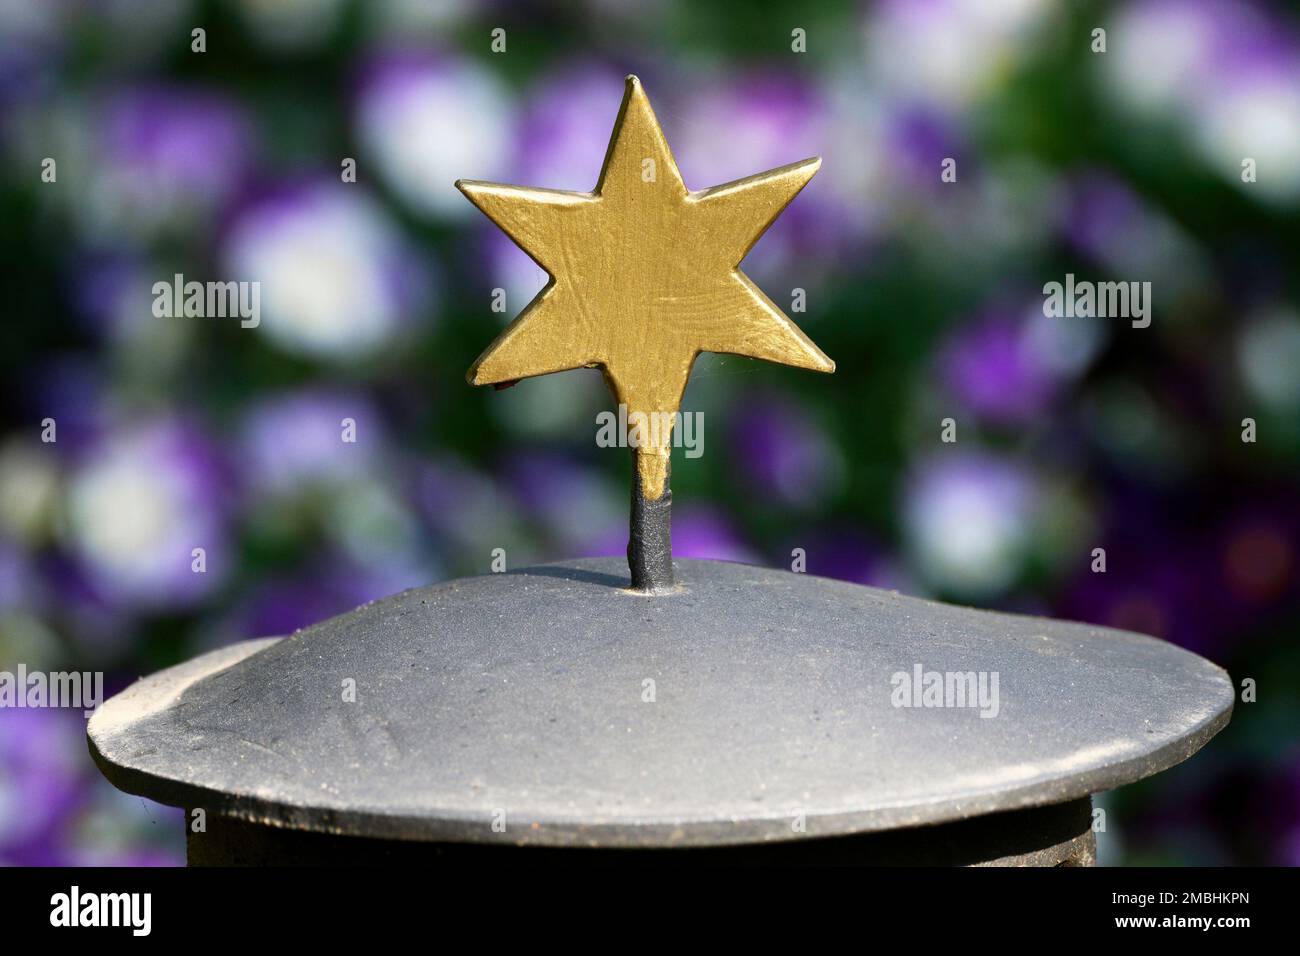 golden star on a grave with colorful spring flowers in blurred background Stock Photo